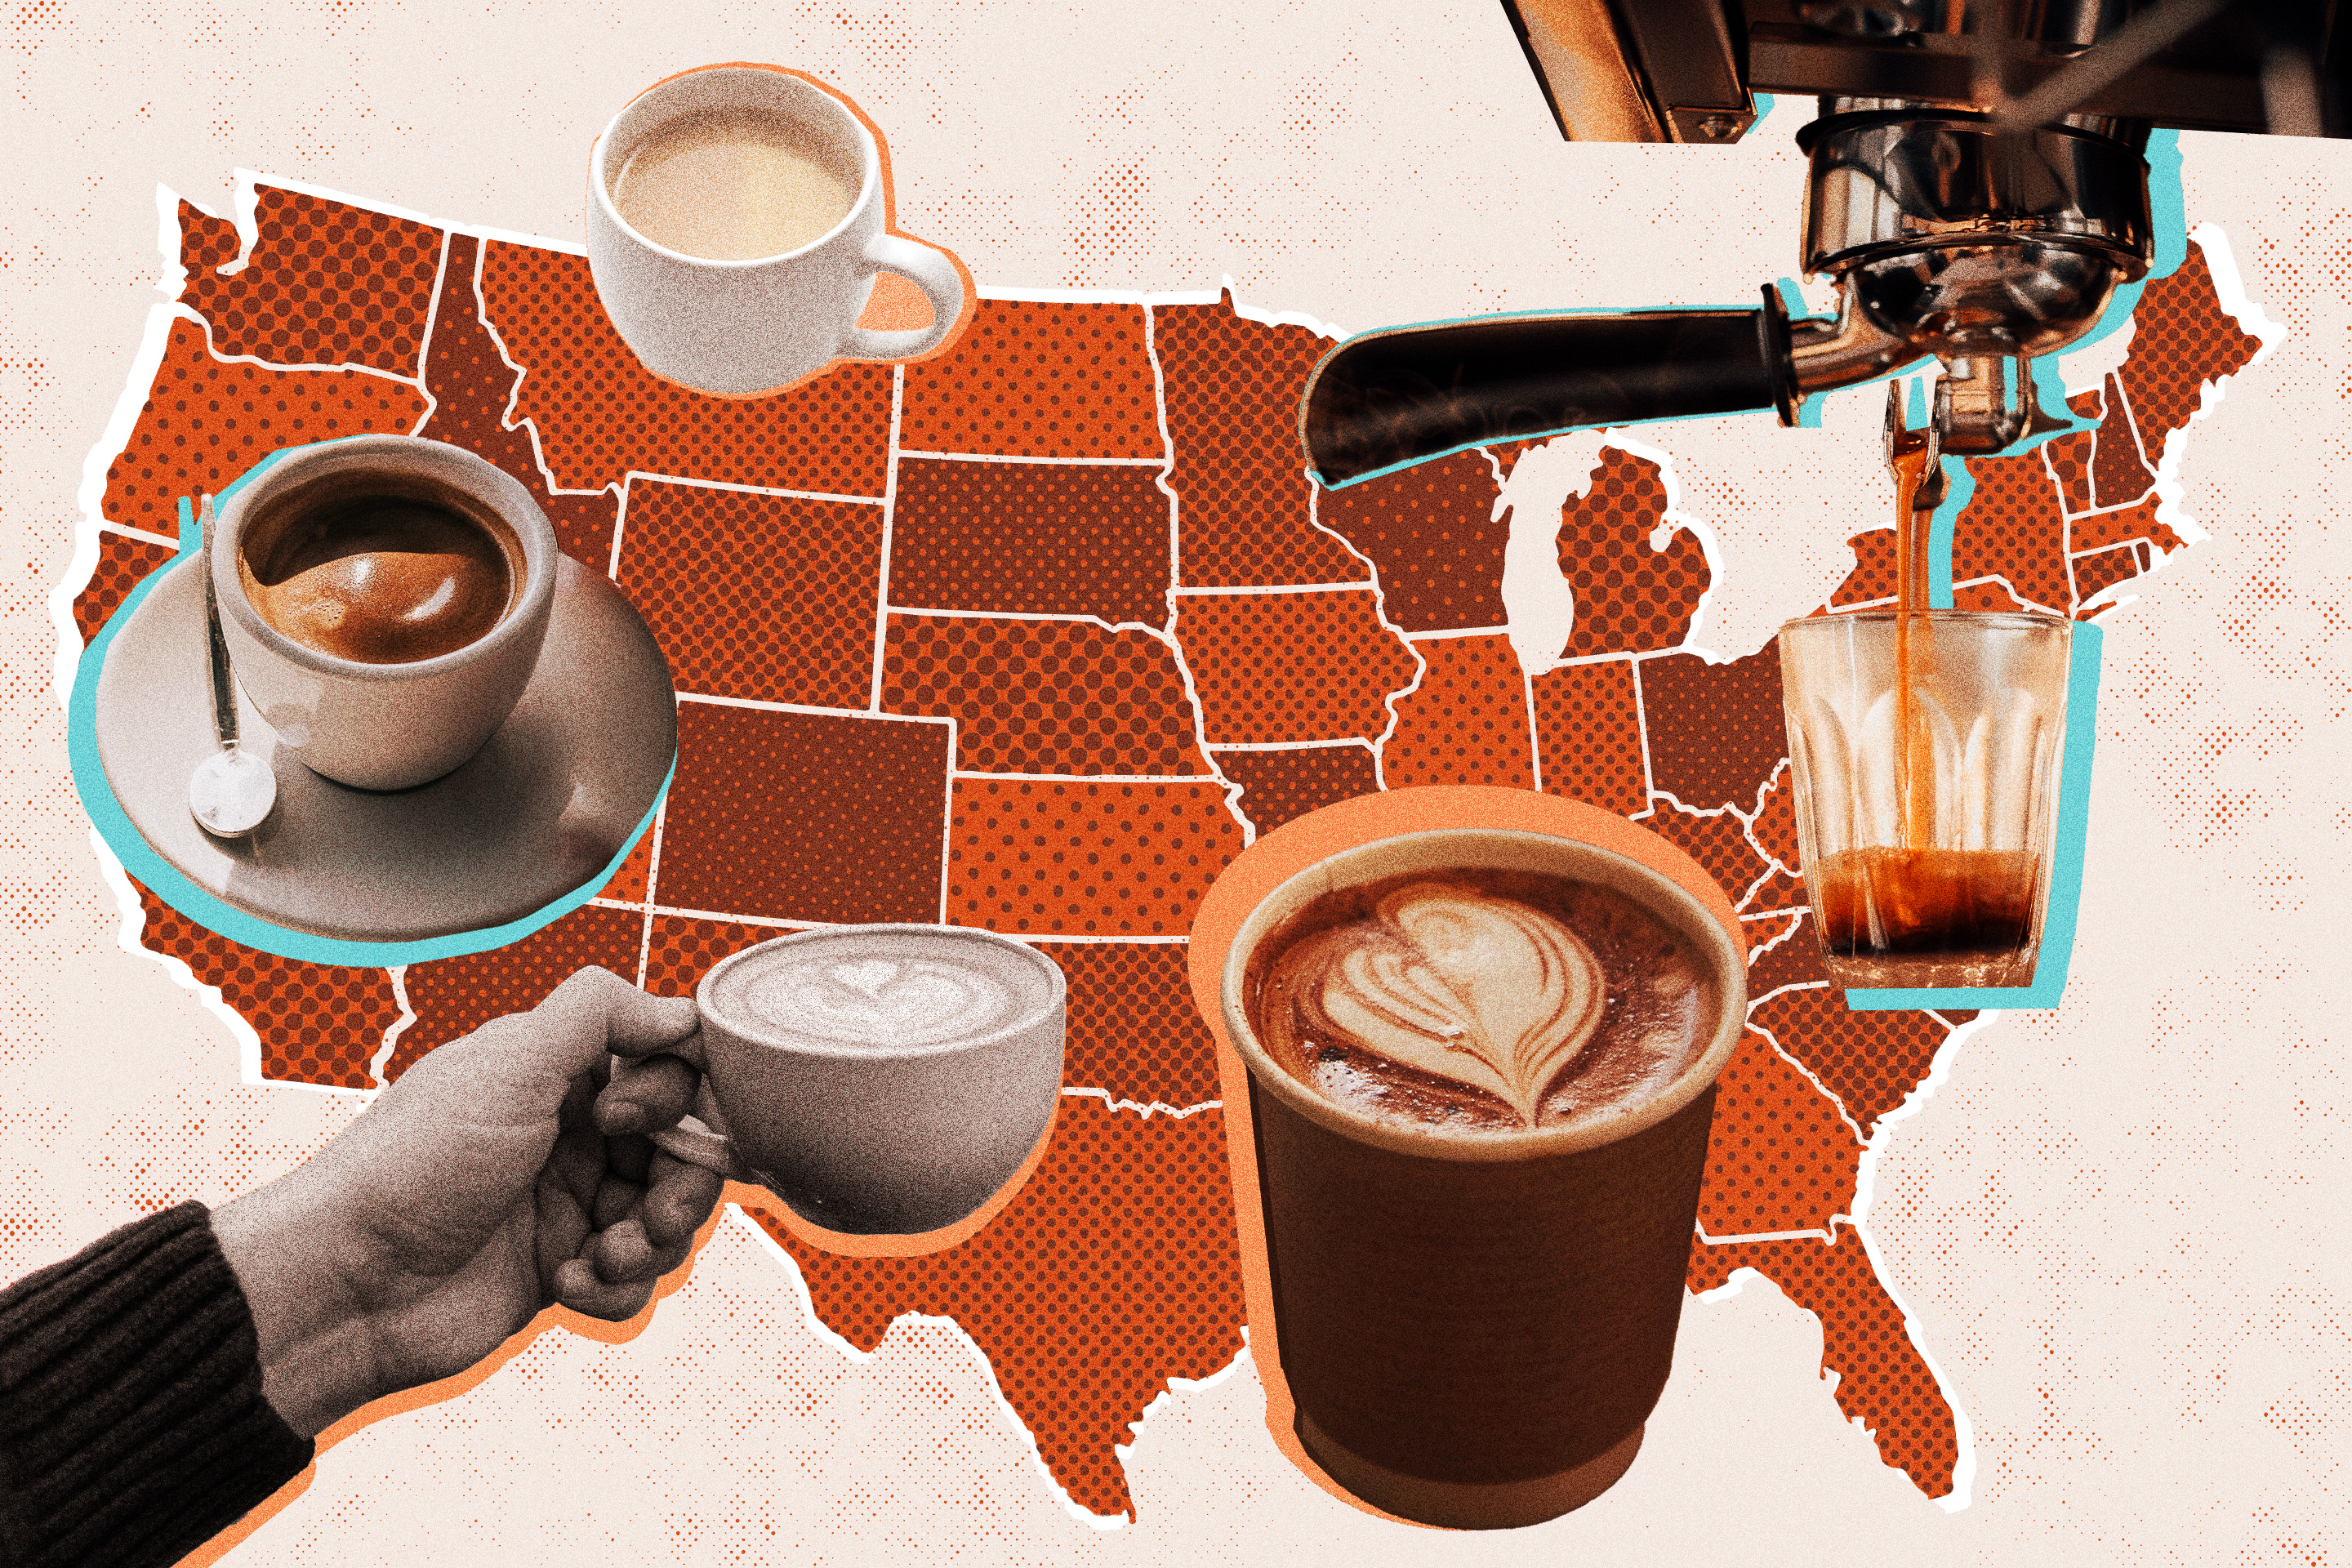 Here's Where Coffee Costs the Most (and Least) in the U.S.